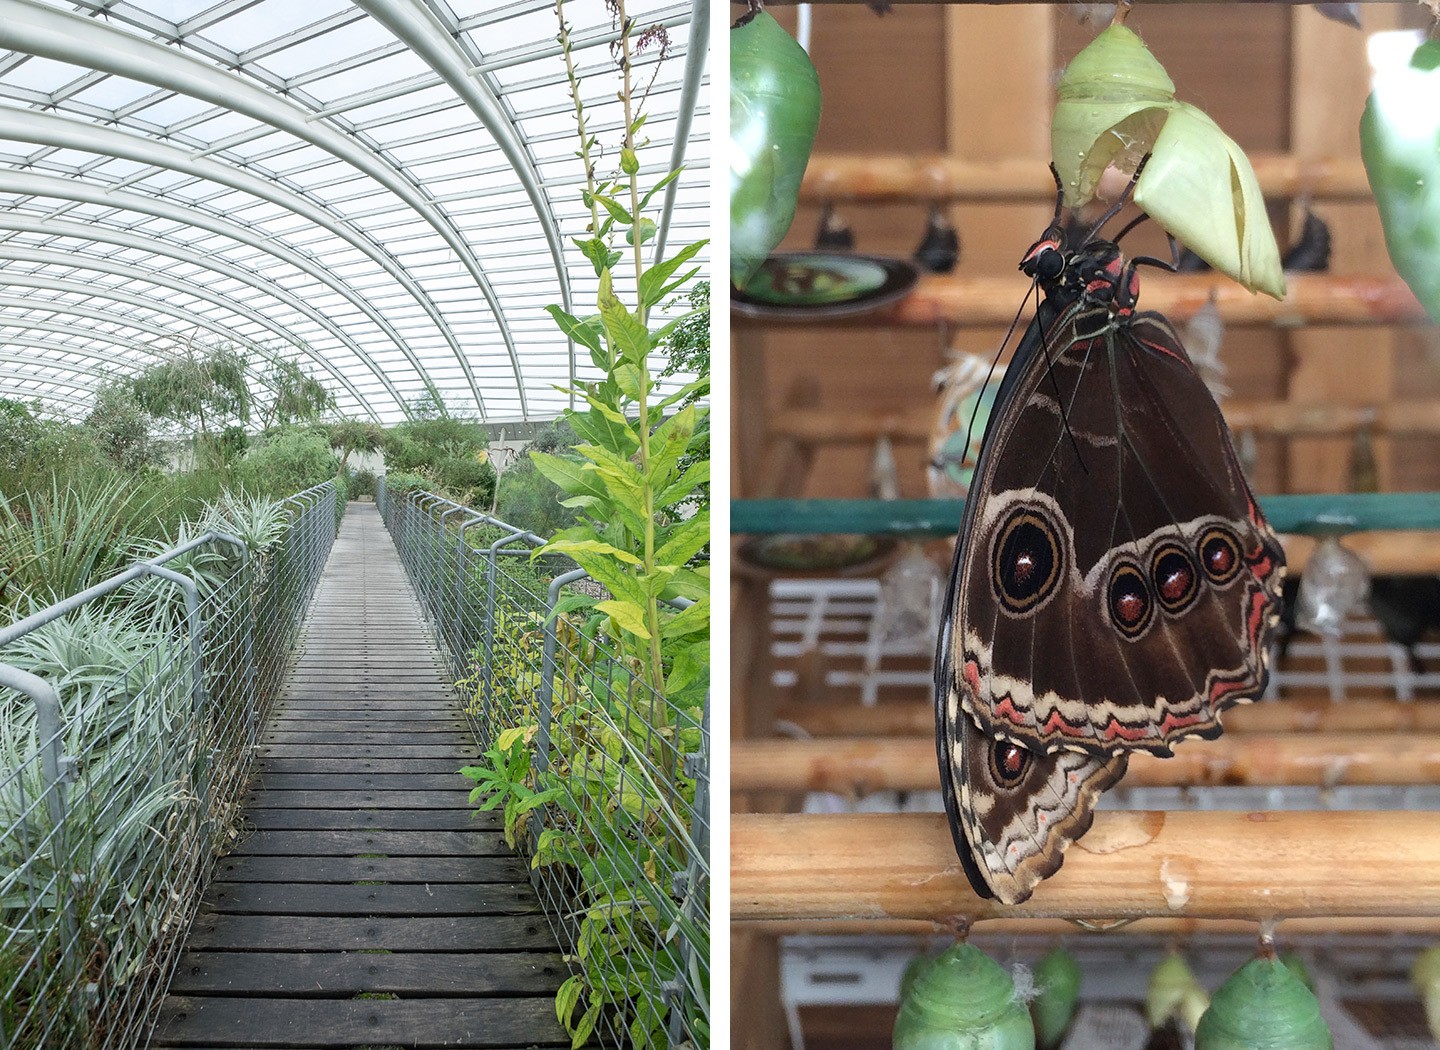 The glasshouse and butterfly hatchery at the National Botanic Garden of Wales 